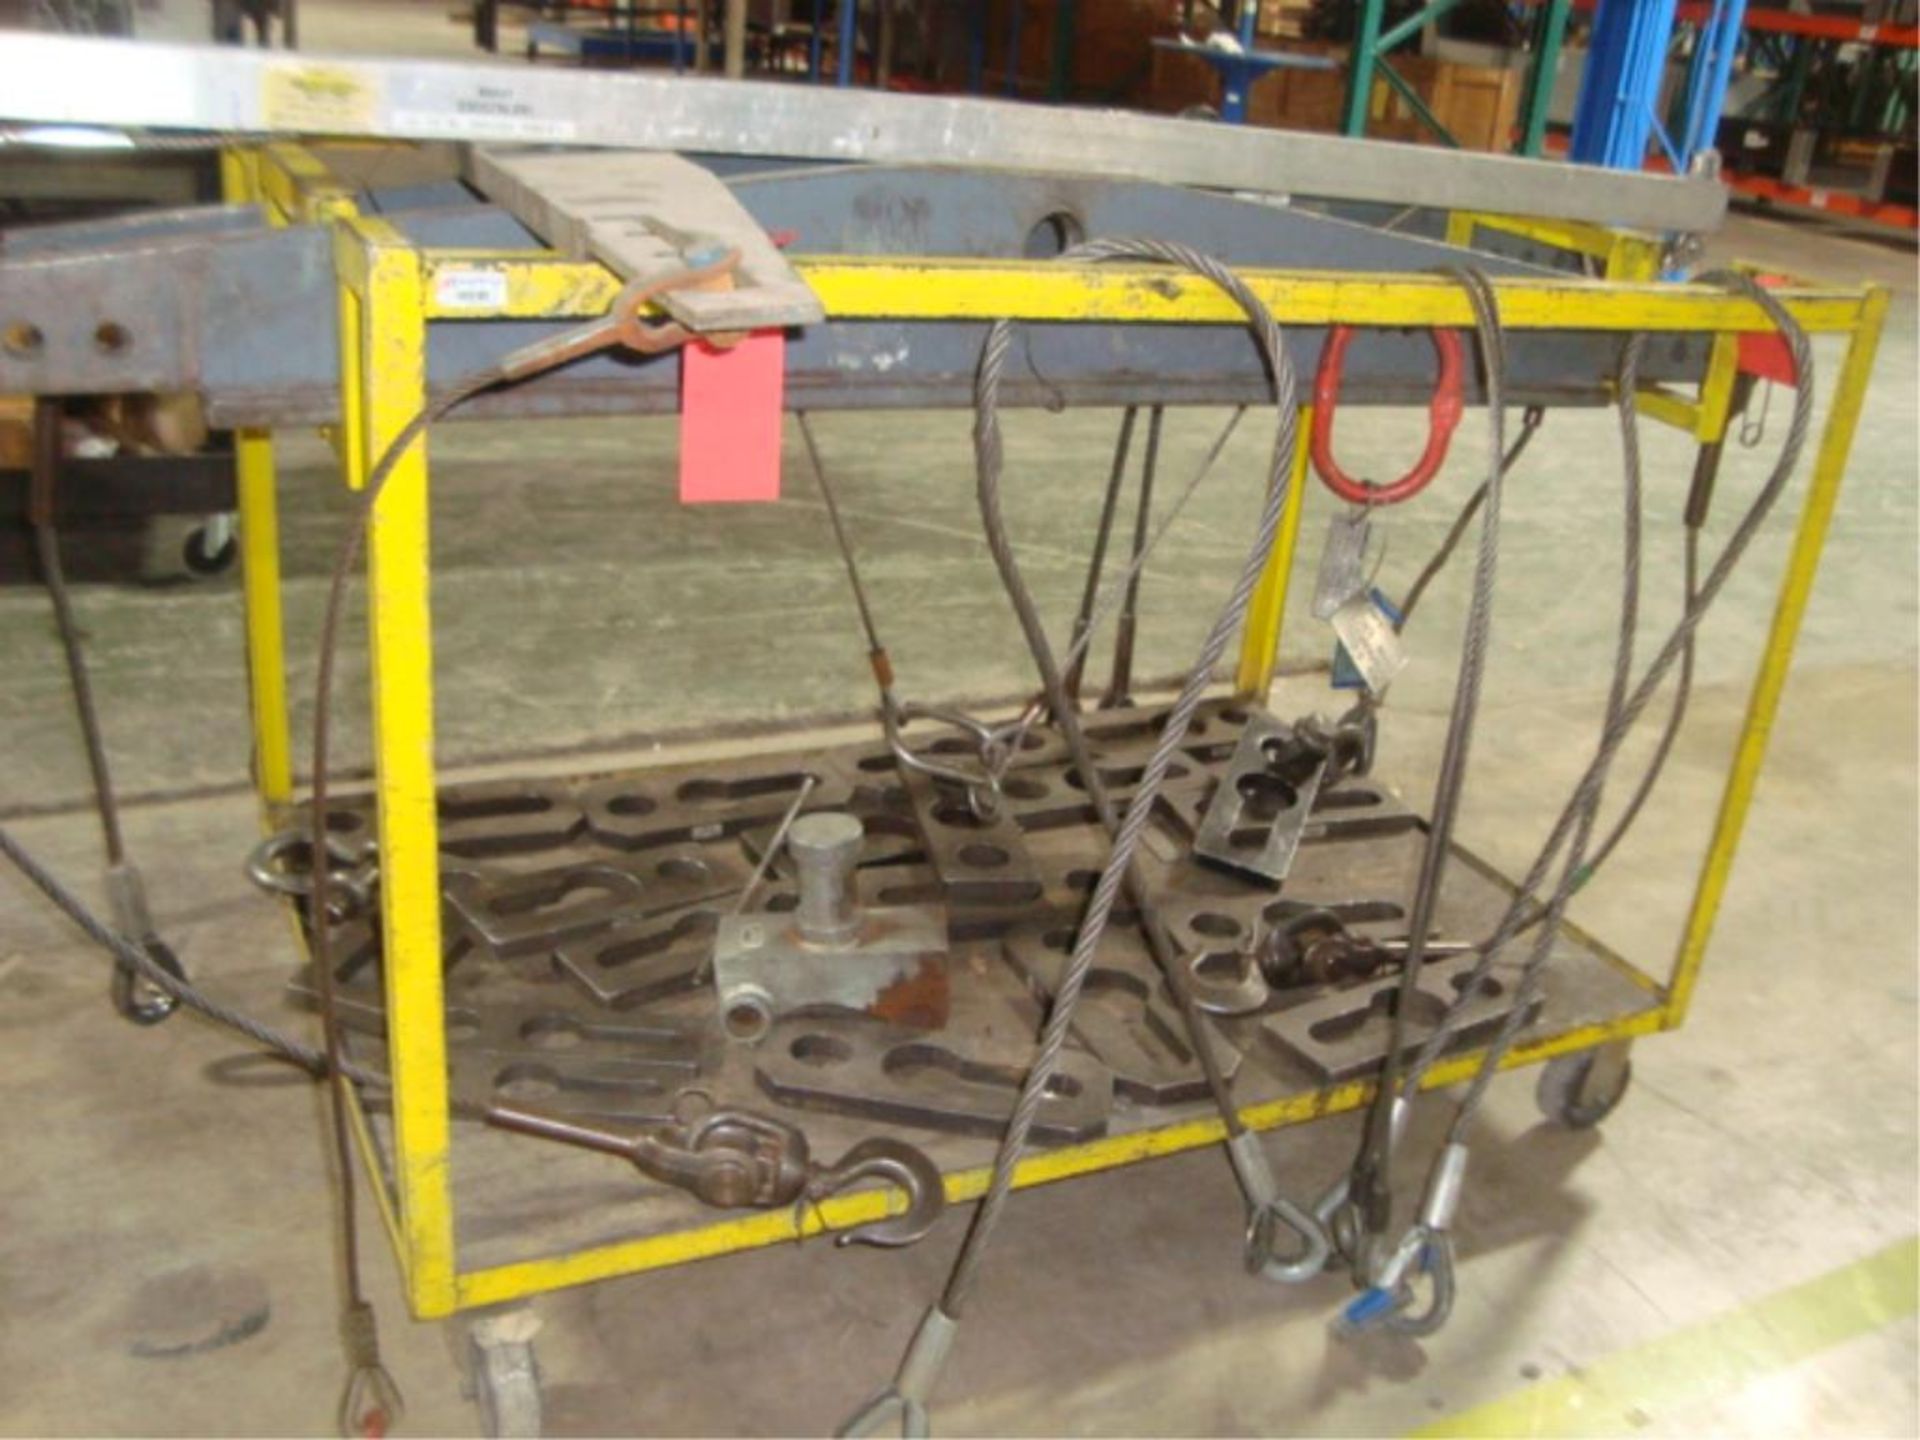 Tool Lift Bars & Mobile Cart With Fixtures - Image 7 of 7